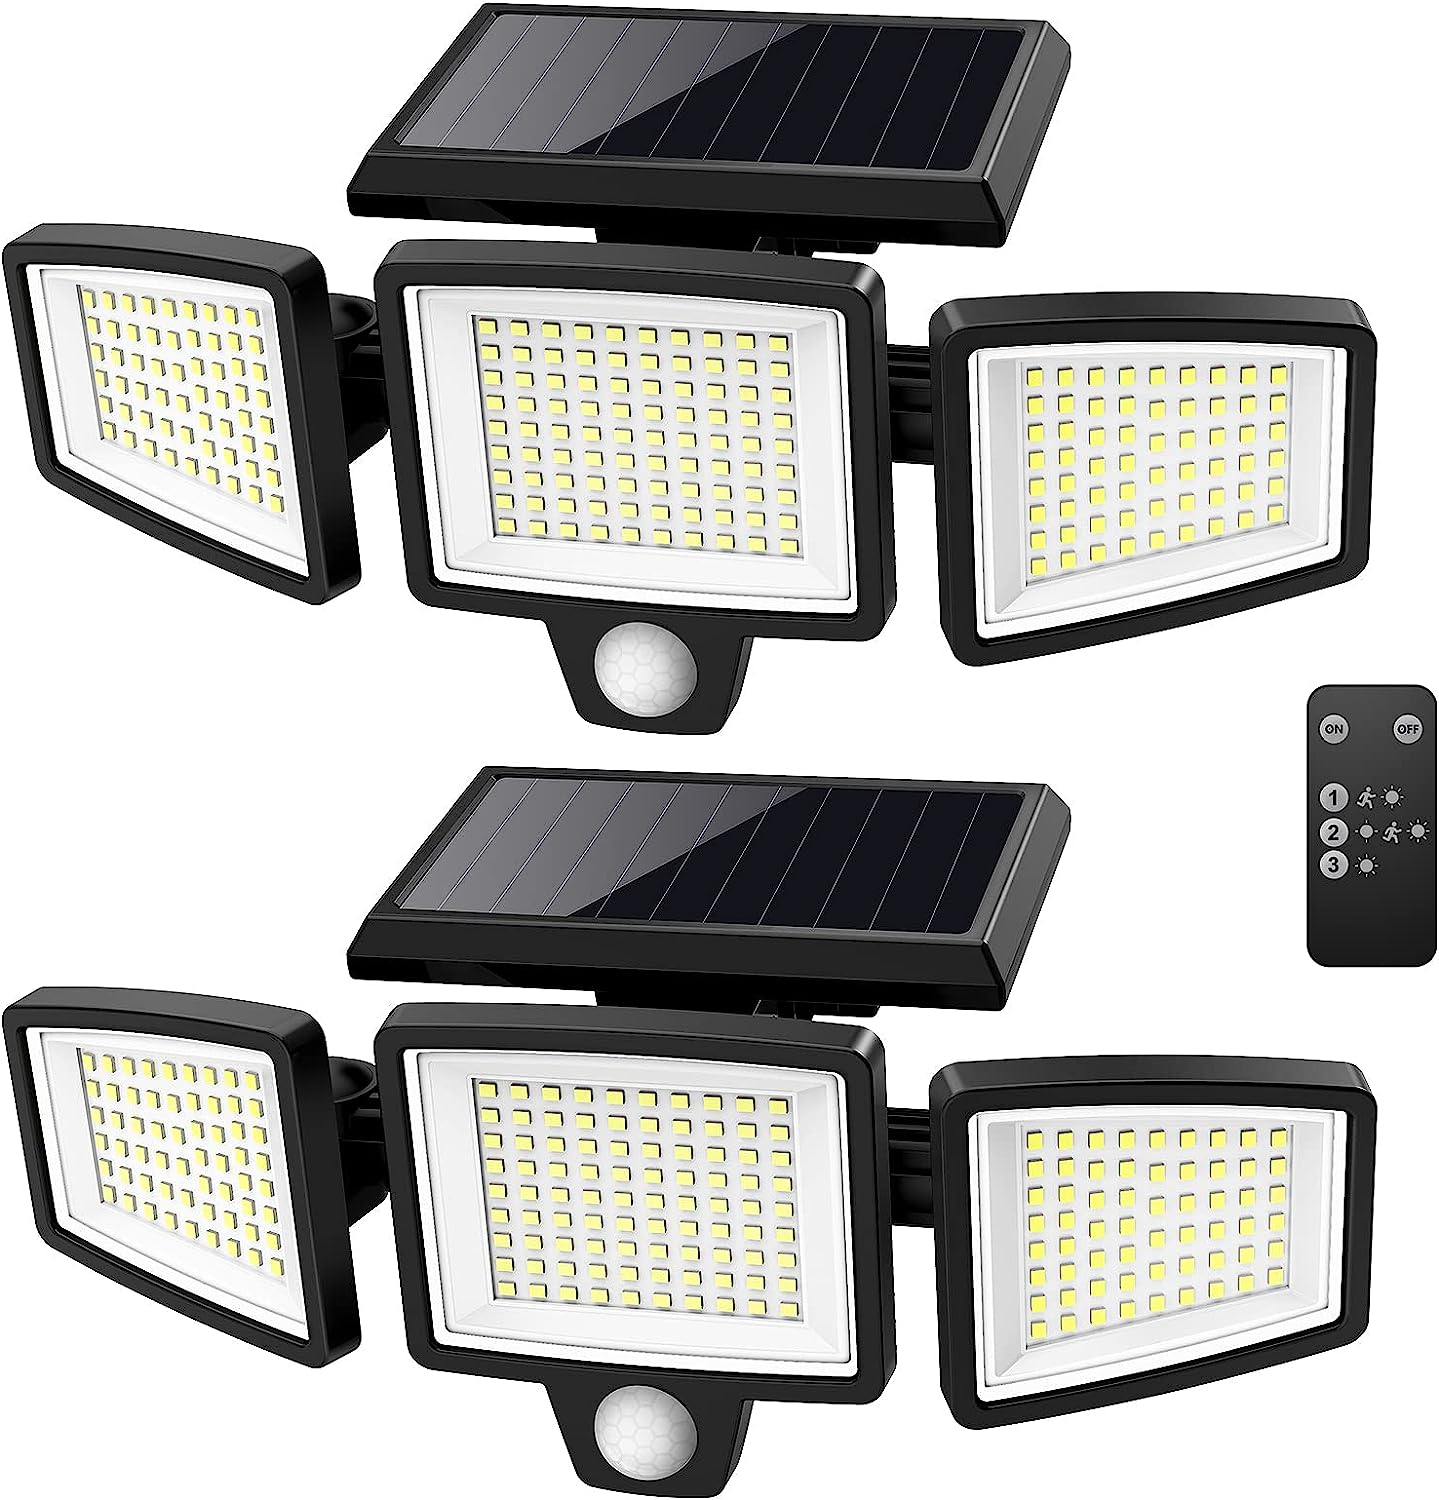 Tuffenough Solar Outdoor Lights 2500LM 210 LED [...]